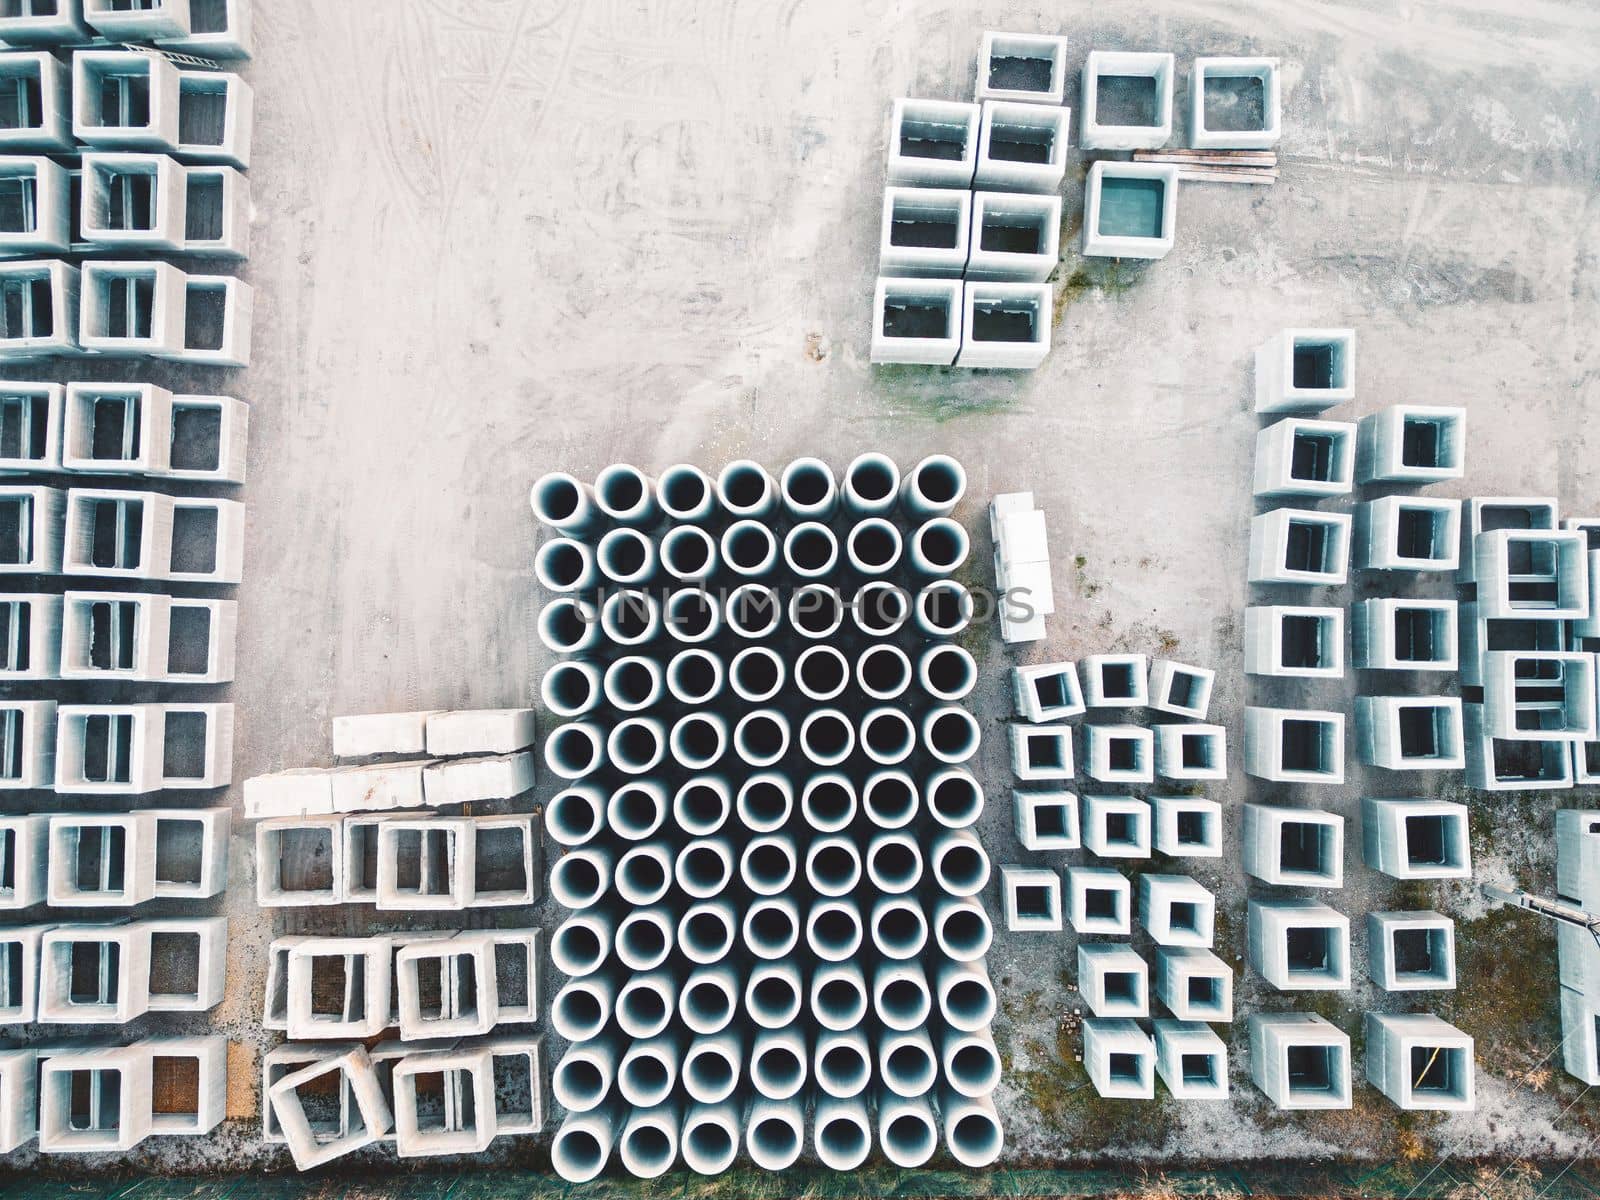 Looking down at concrete blocks and pipes neatly stacked in rows on the ground by VisualProductions